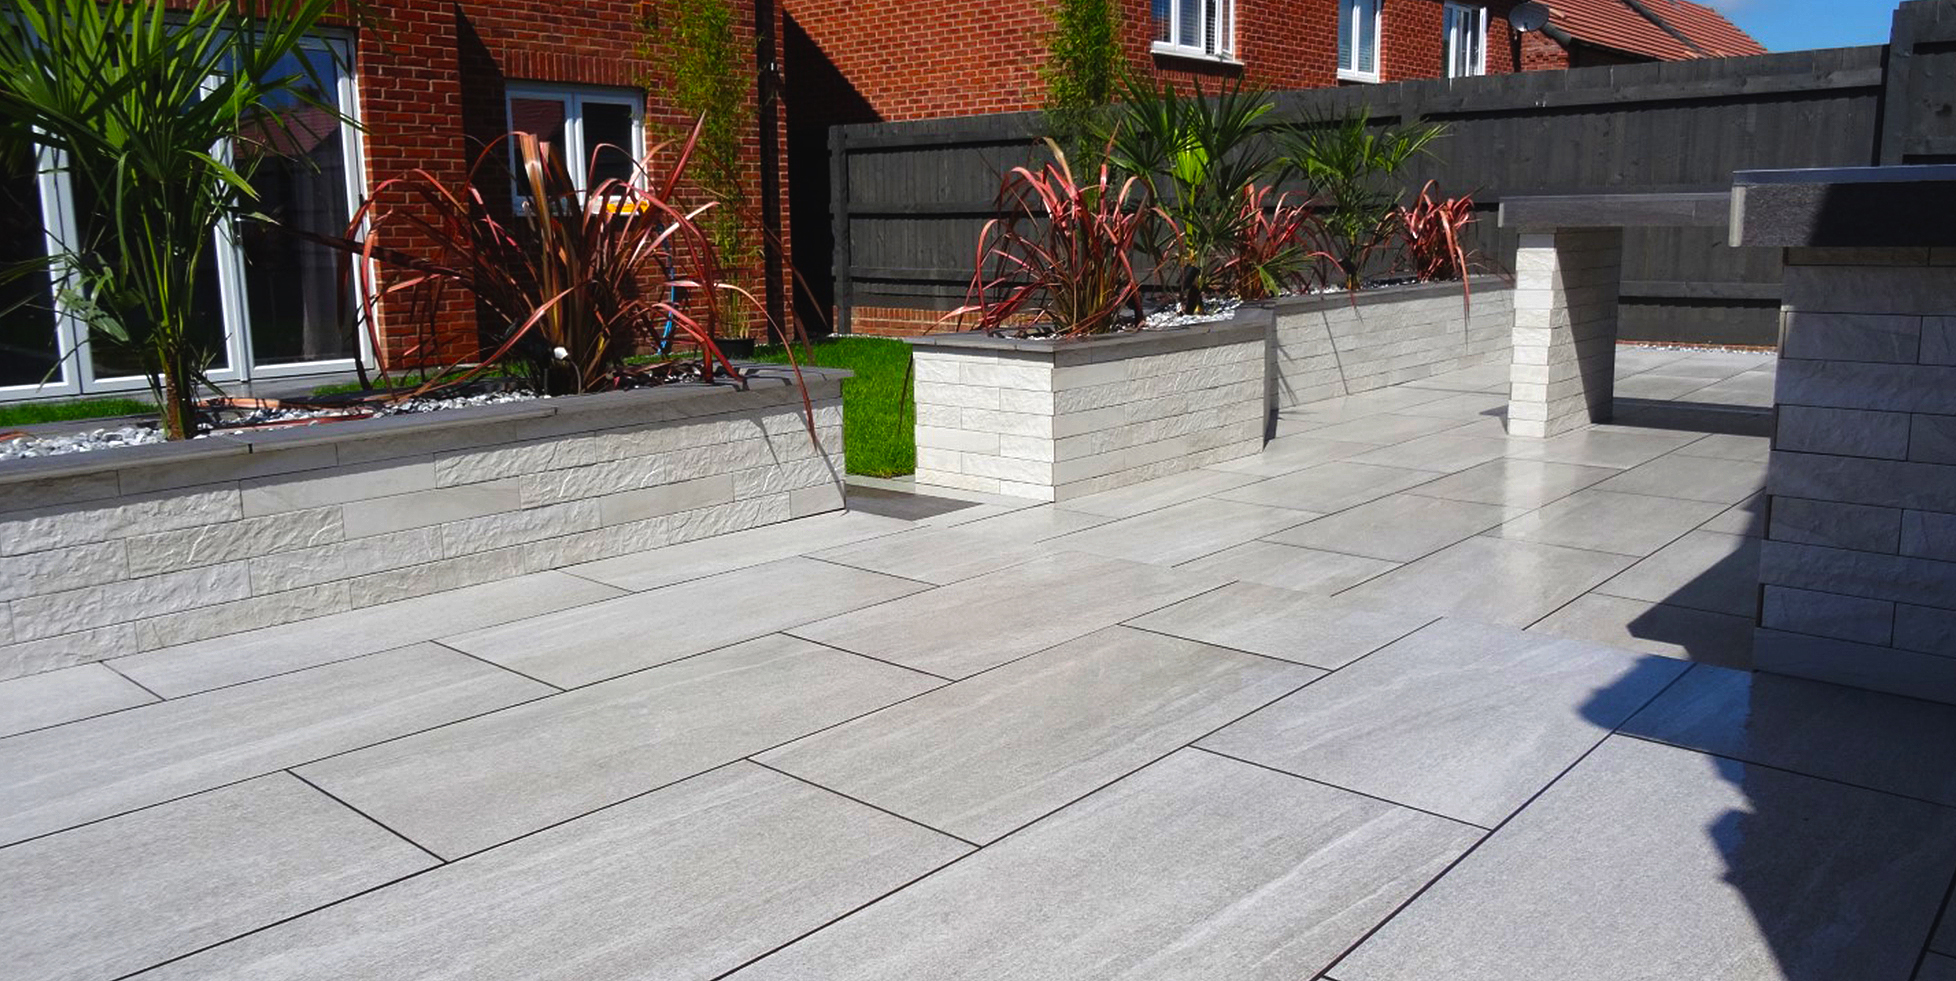 Landscaping Specialists in Northamptonshire